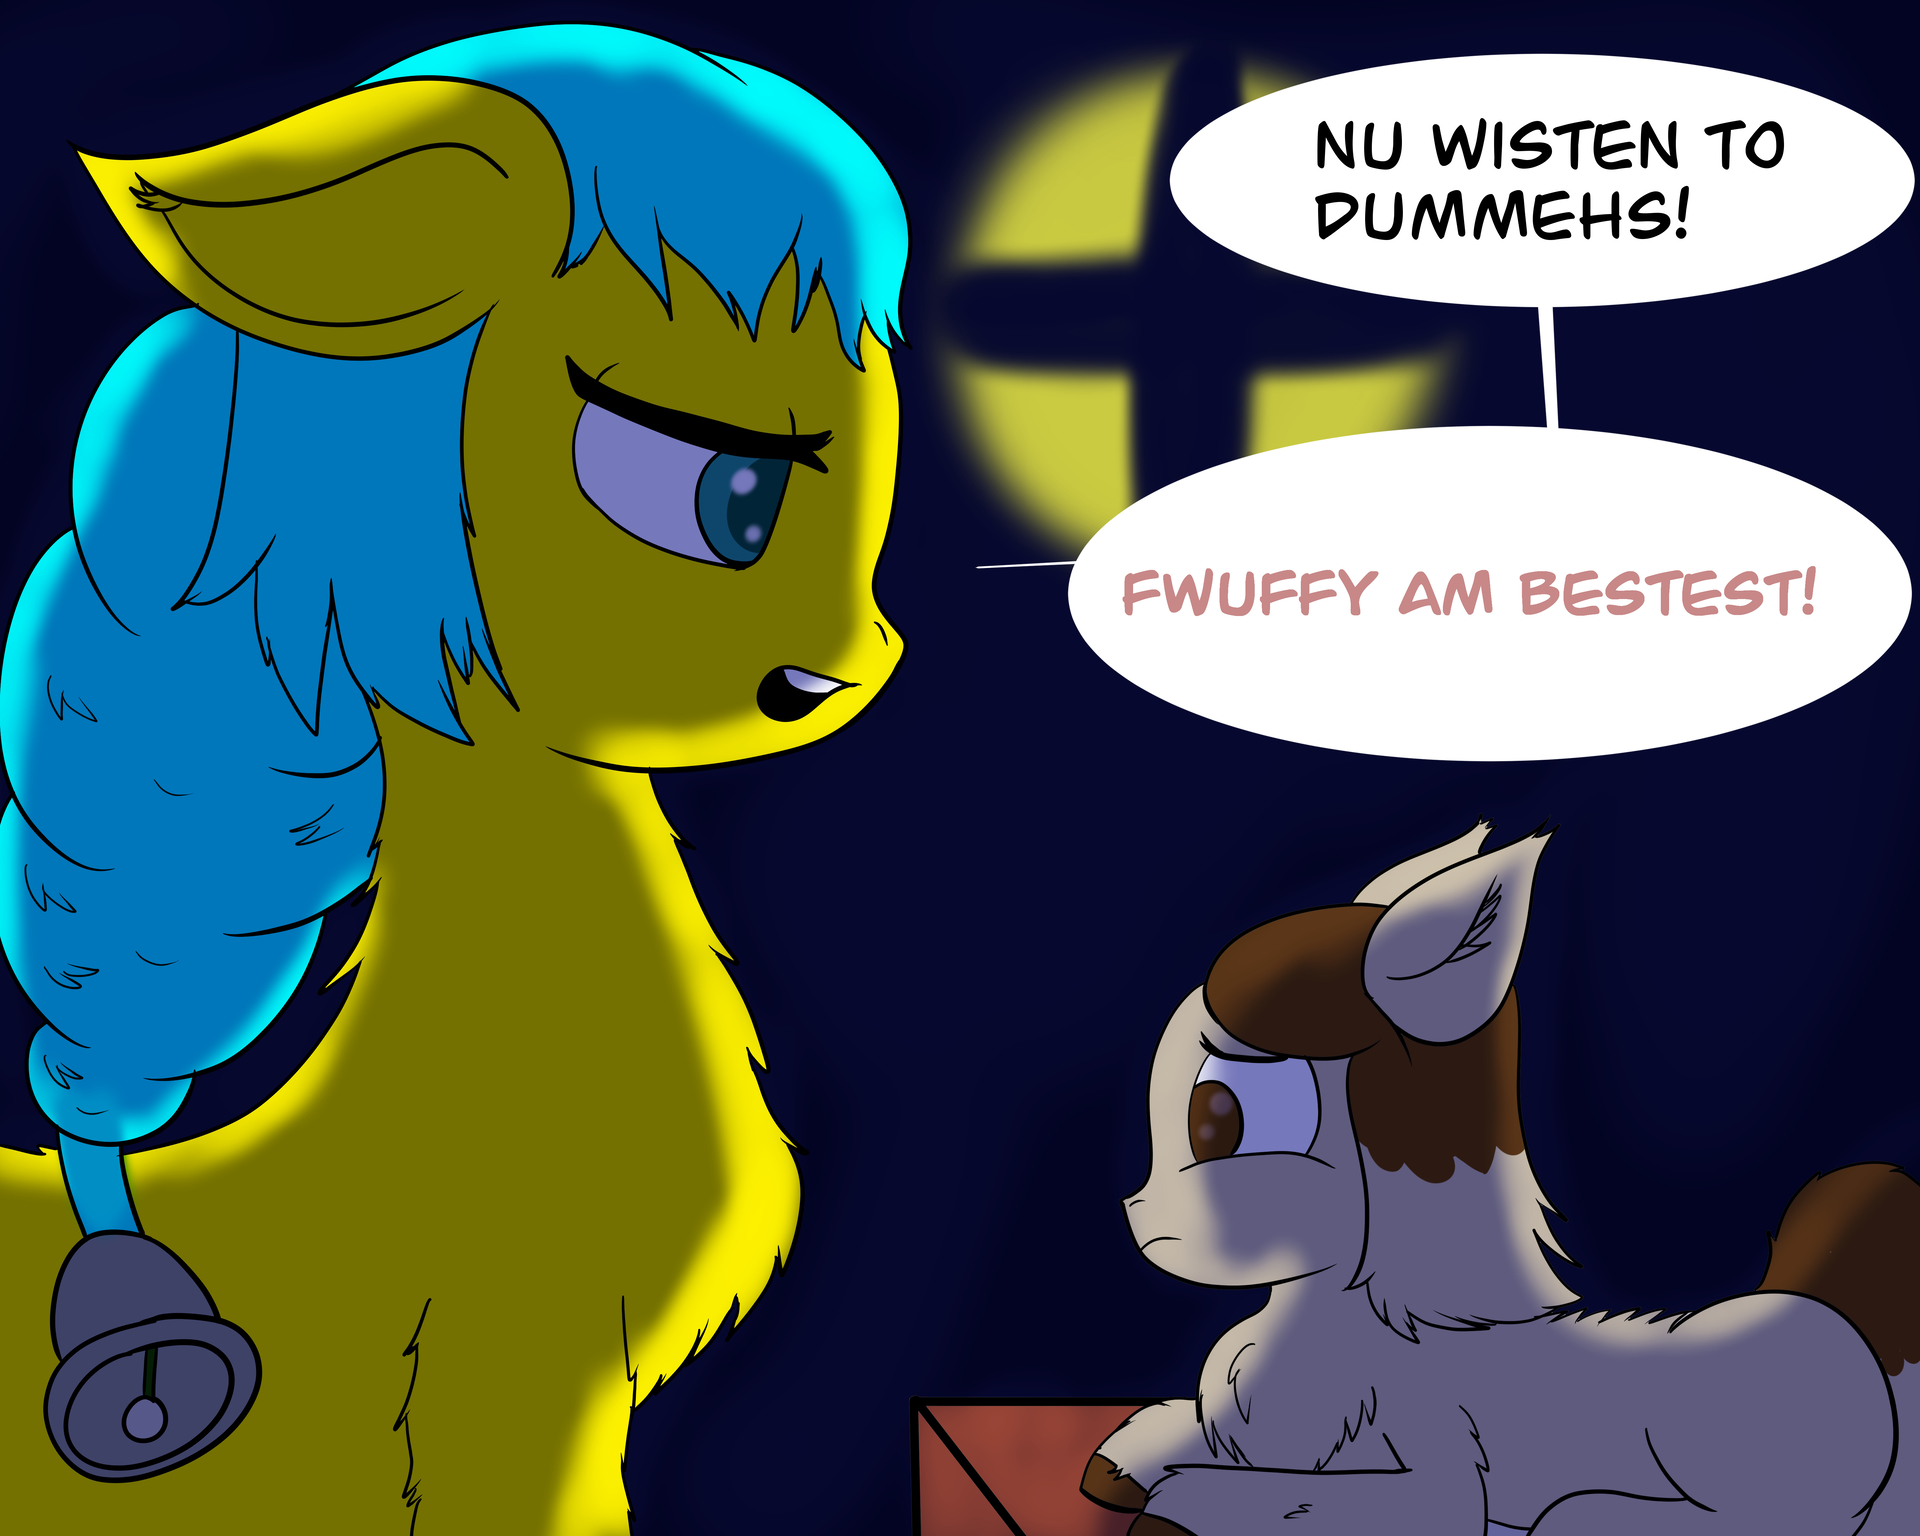 kind-words-by-ponepone-fluffy-image-self-posting-fluffycommunity